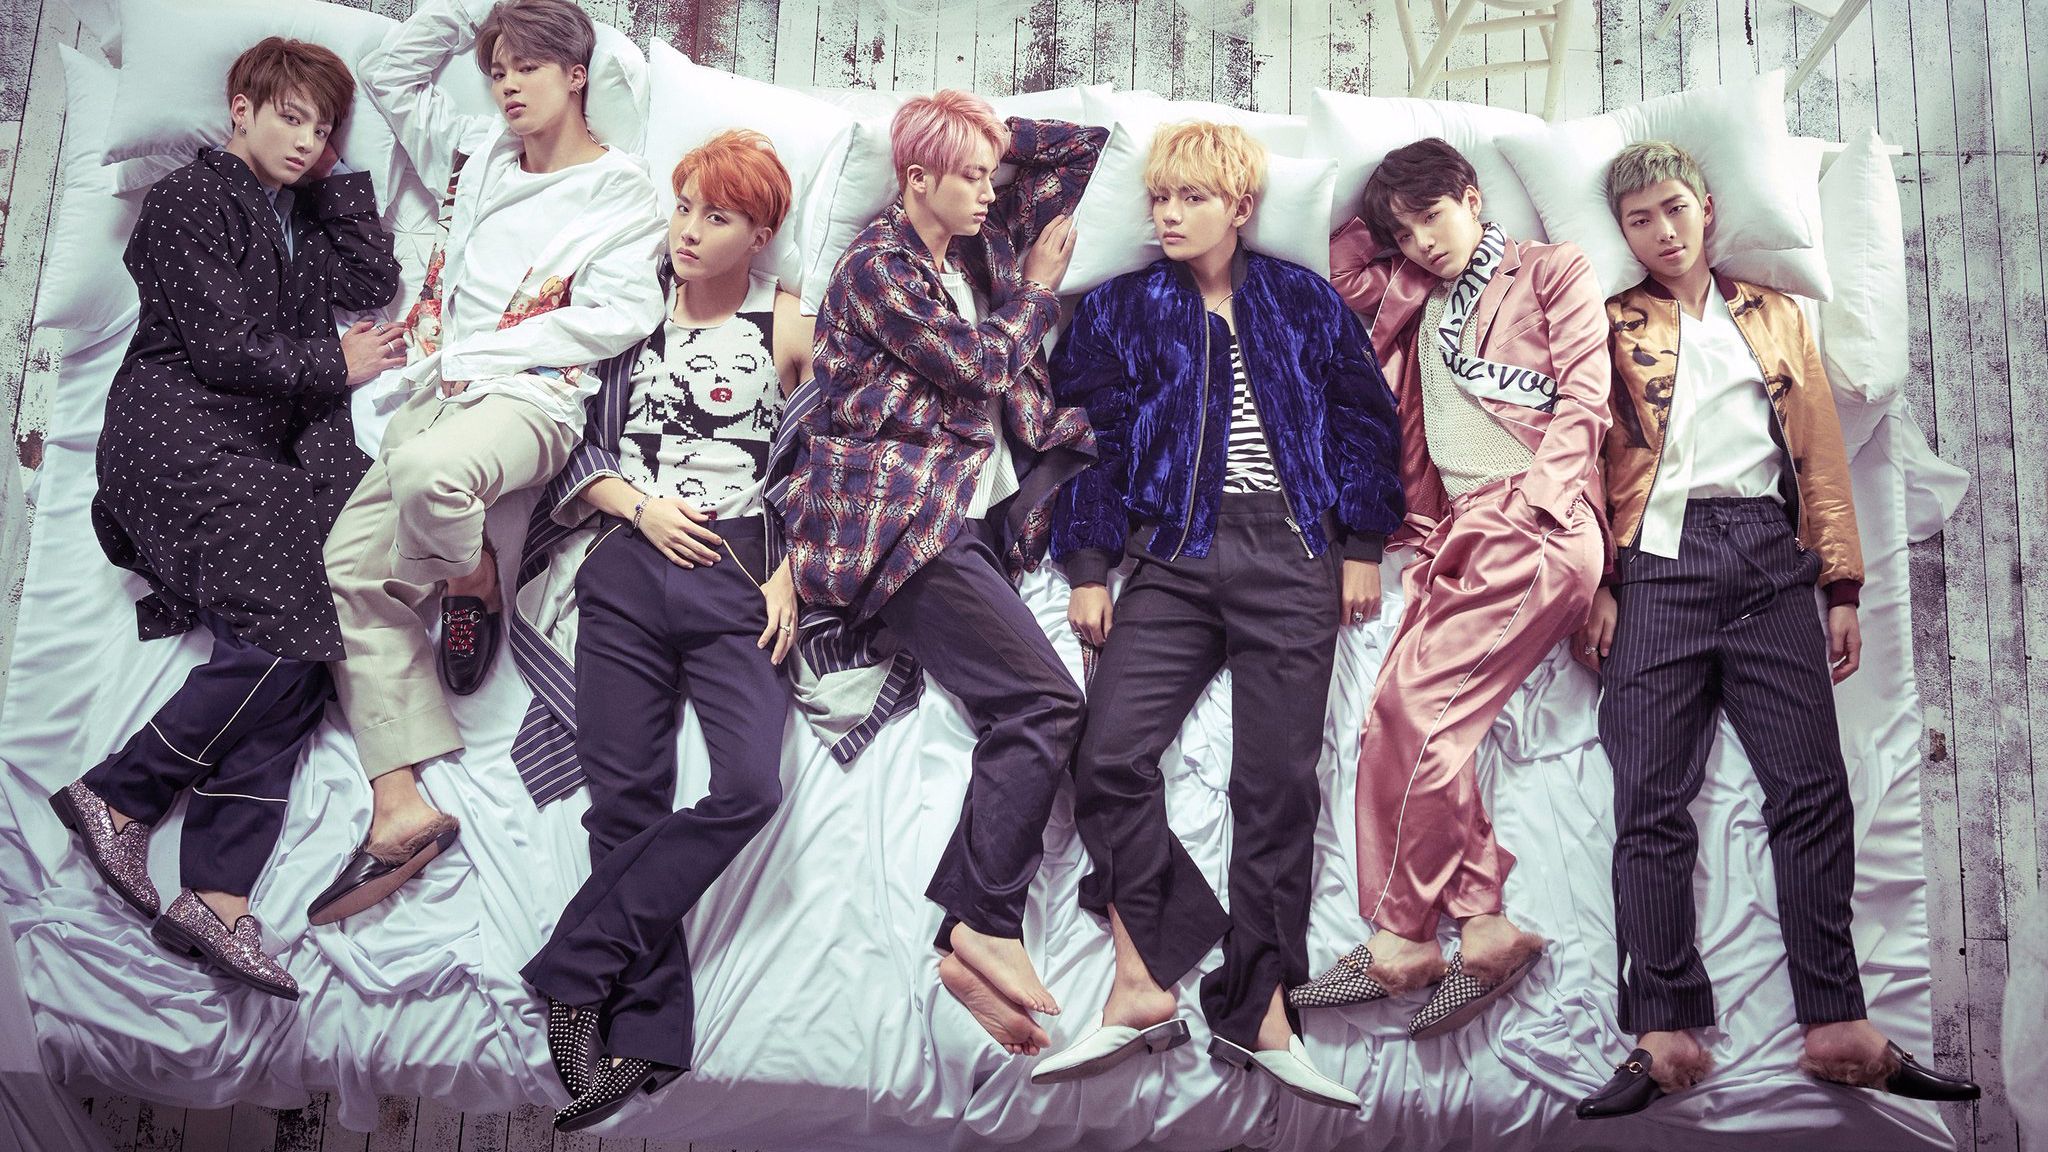 BTS, the most popular K-pop group in the world, have released a new album - BTS